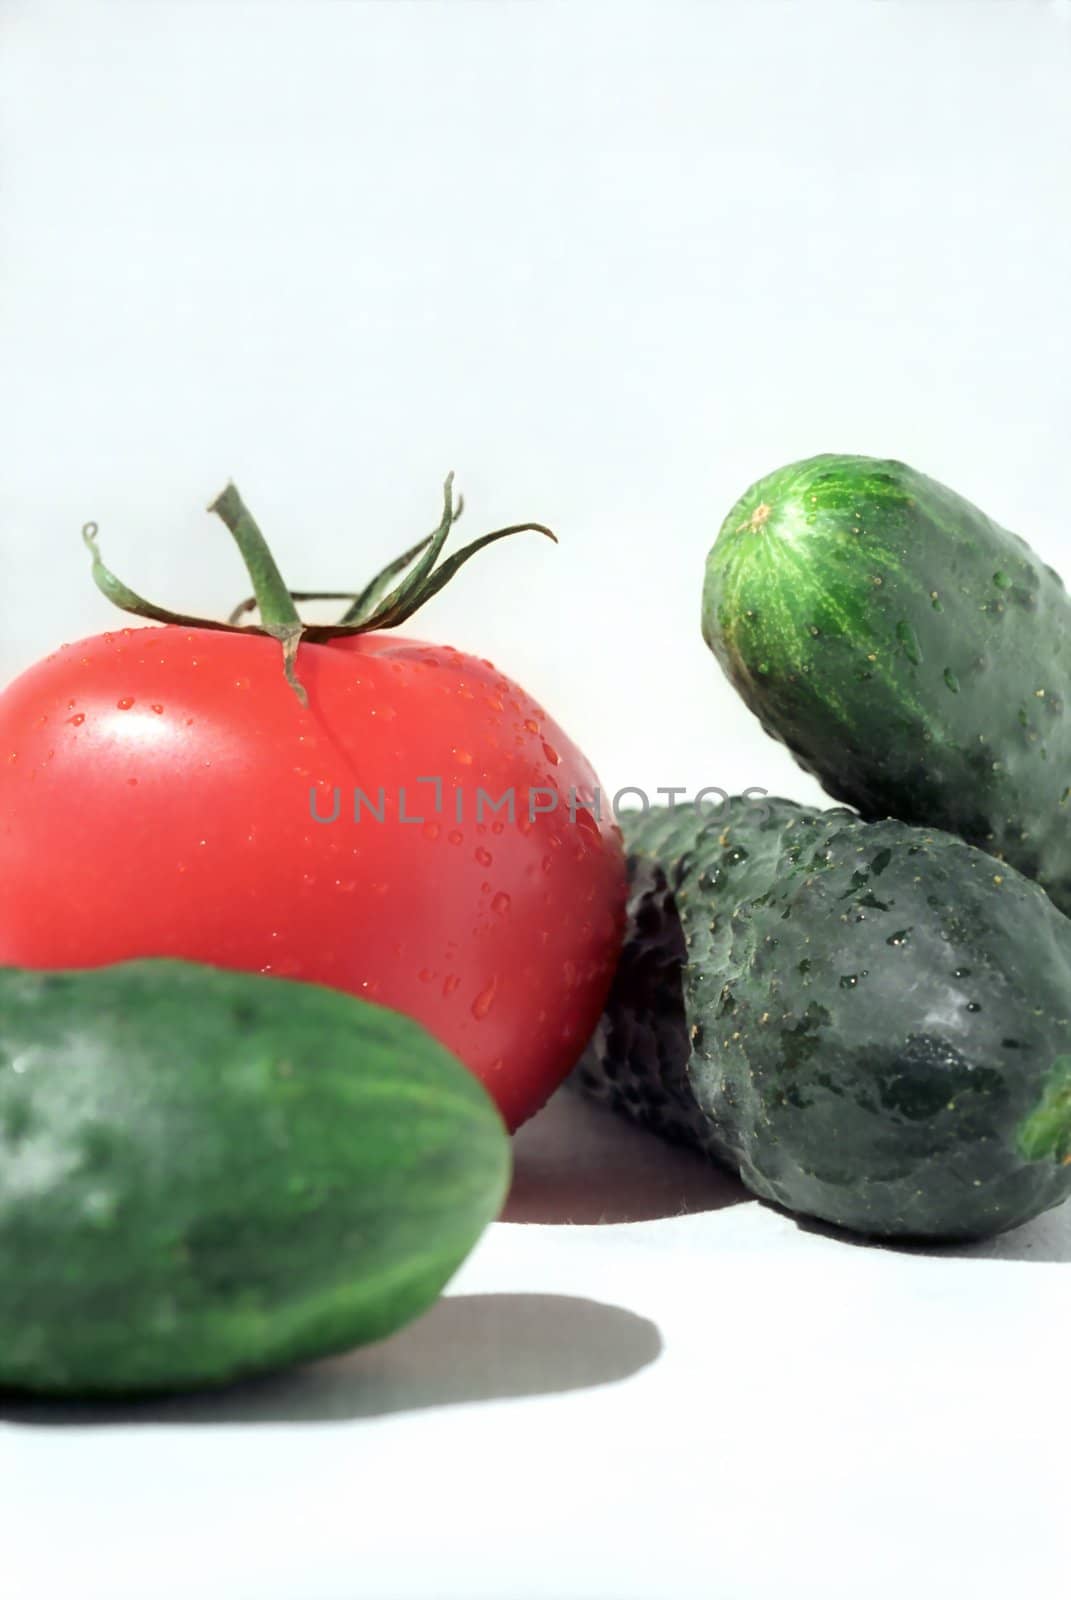 Tomato and cucumbers by mulden